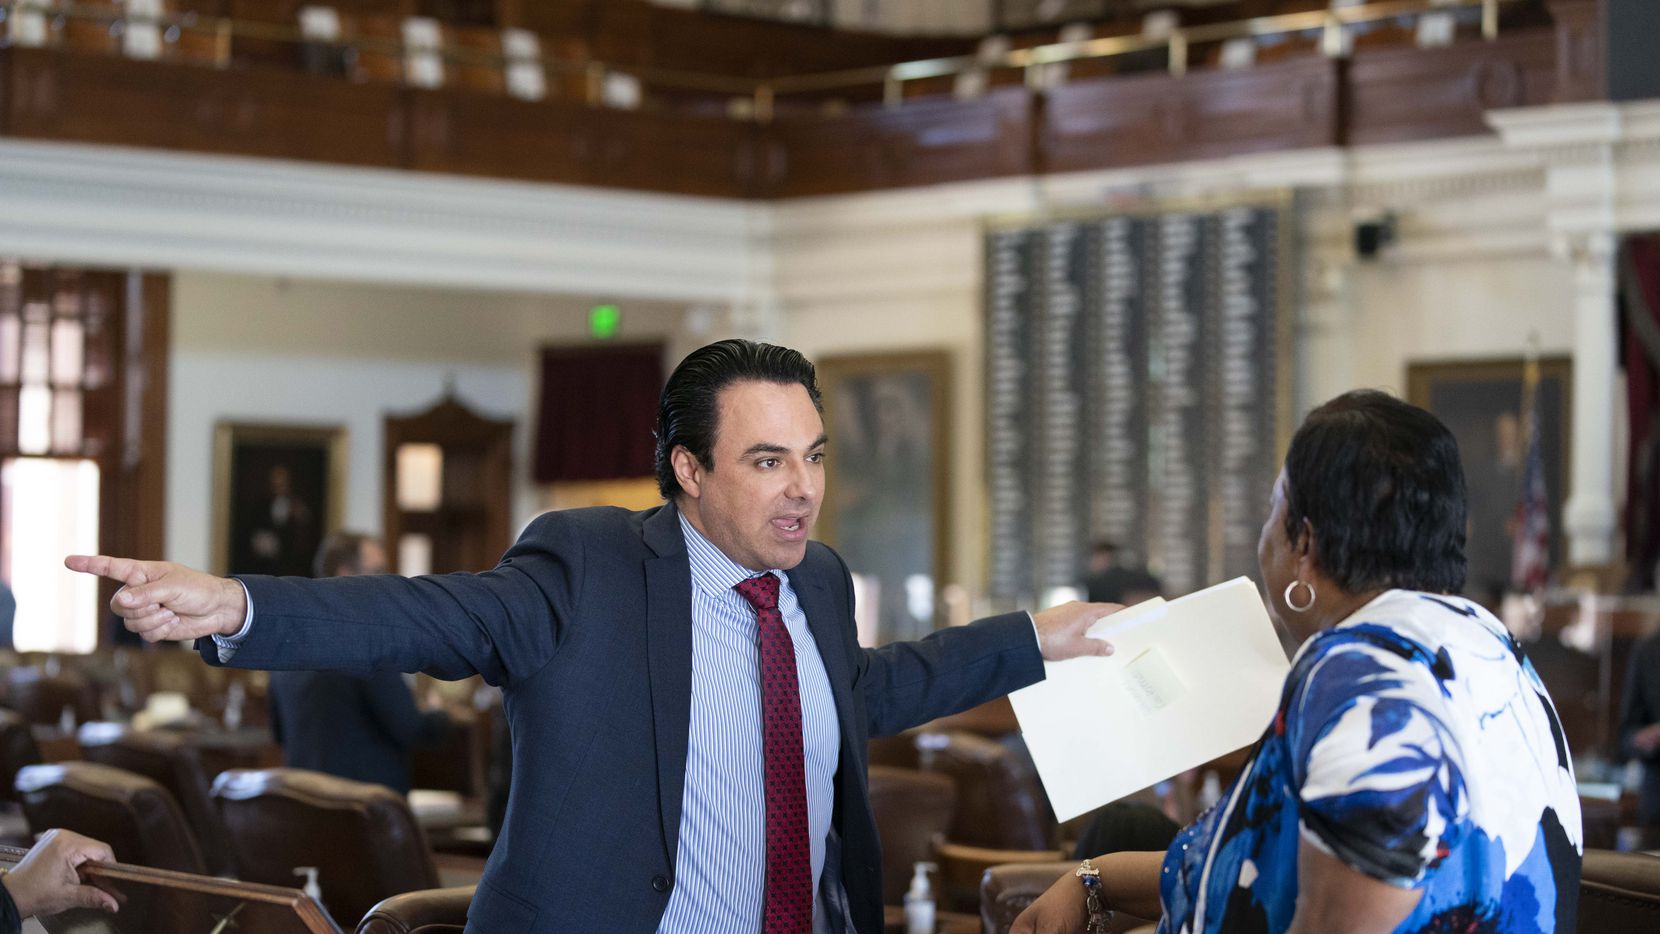 State Rep. Terry Canales, D-Edinburg, talks with Rep. Yvonne Davis, r, of Dallas on the...